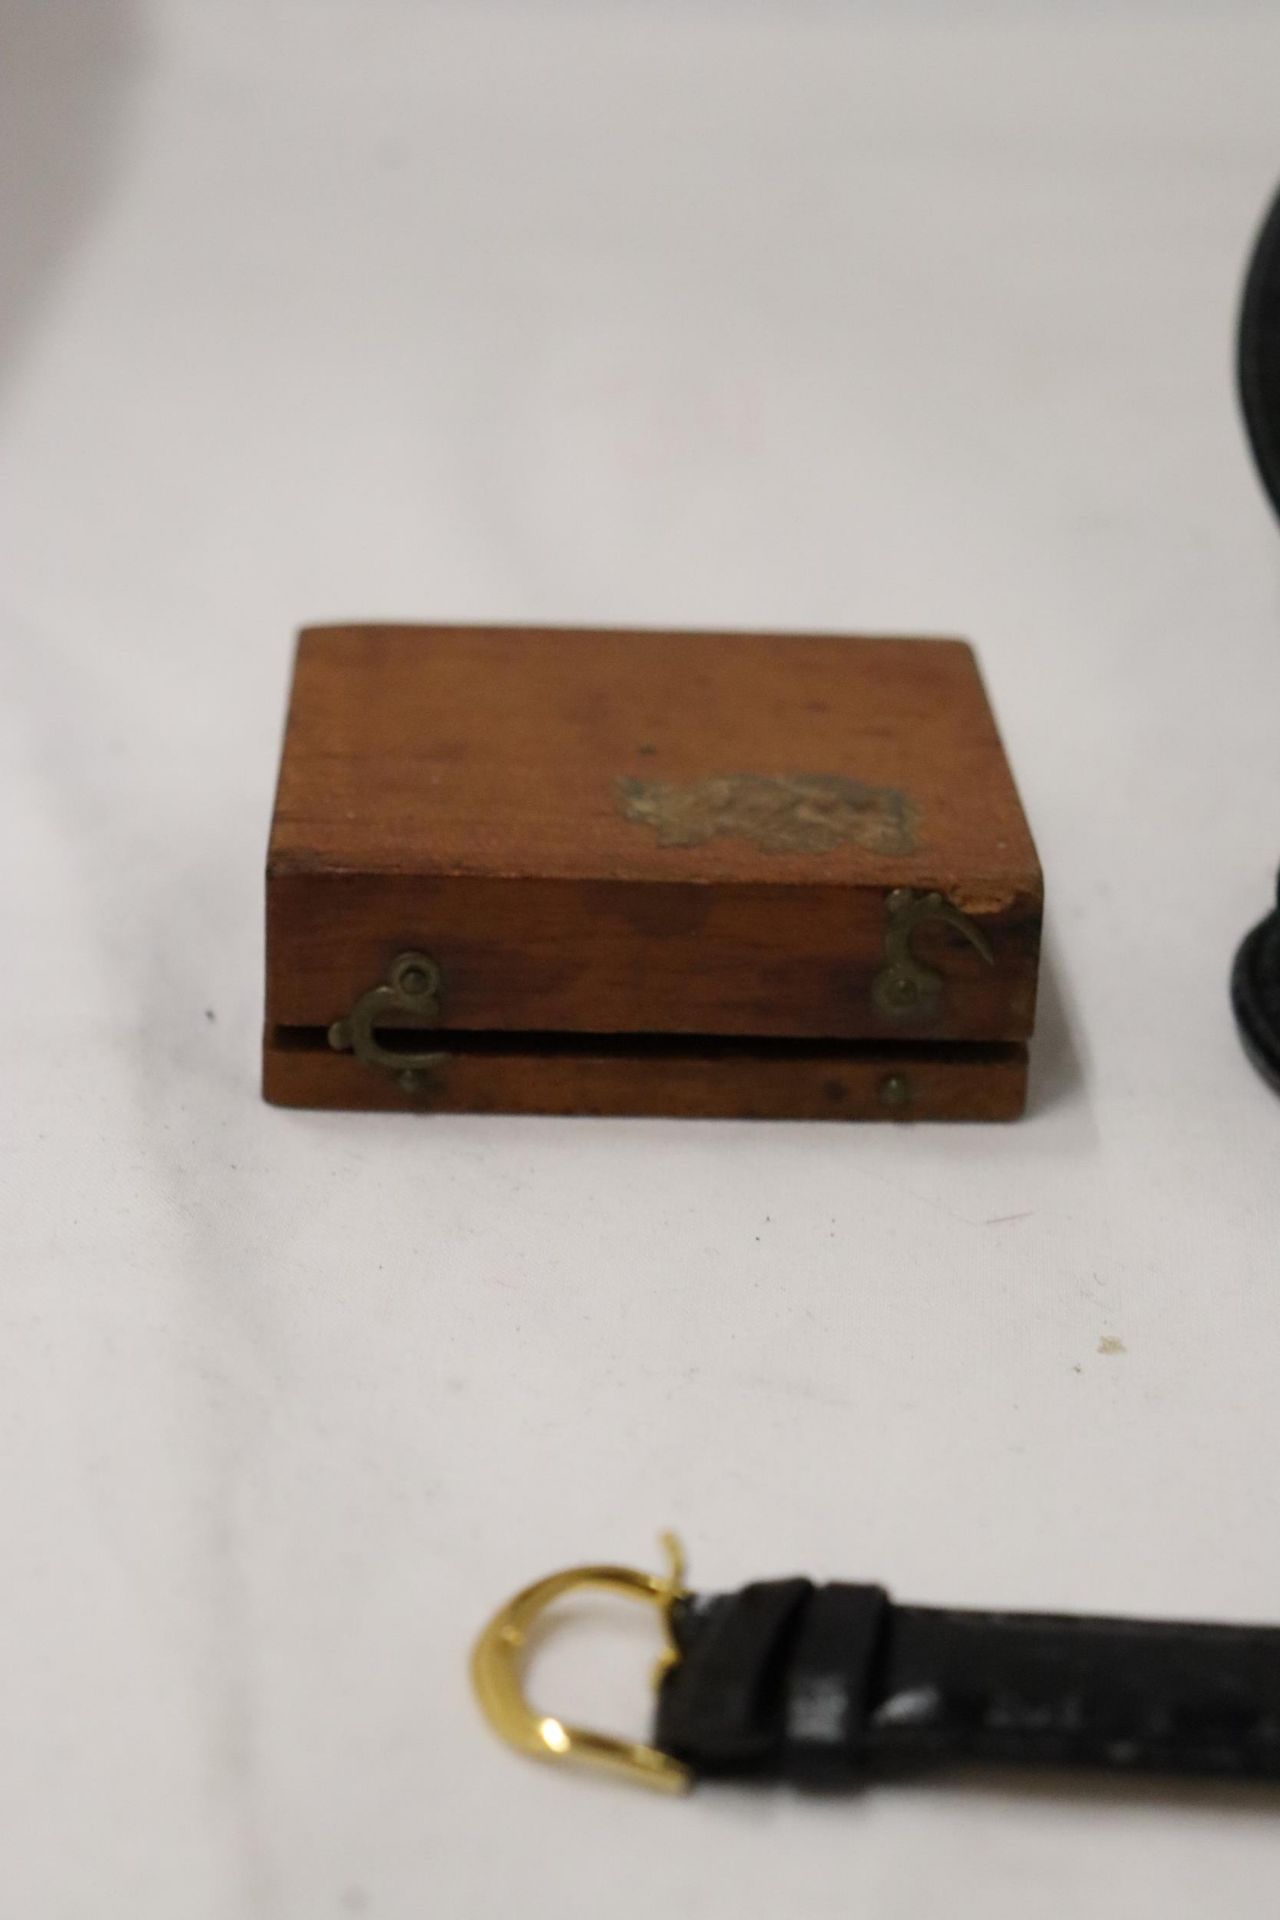 A VINTAGE COMPASS IN AN OAK CASE, A COMPENSATED FOR TEMPERATURE INSTUMENT, MADE BY S & M, DYSON & - Image 7 of 7